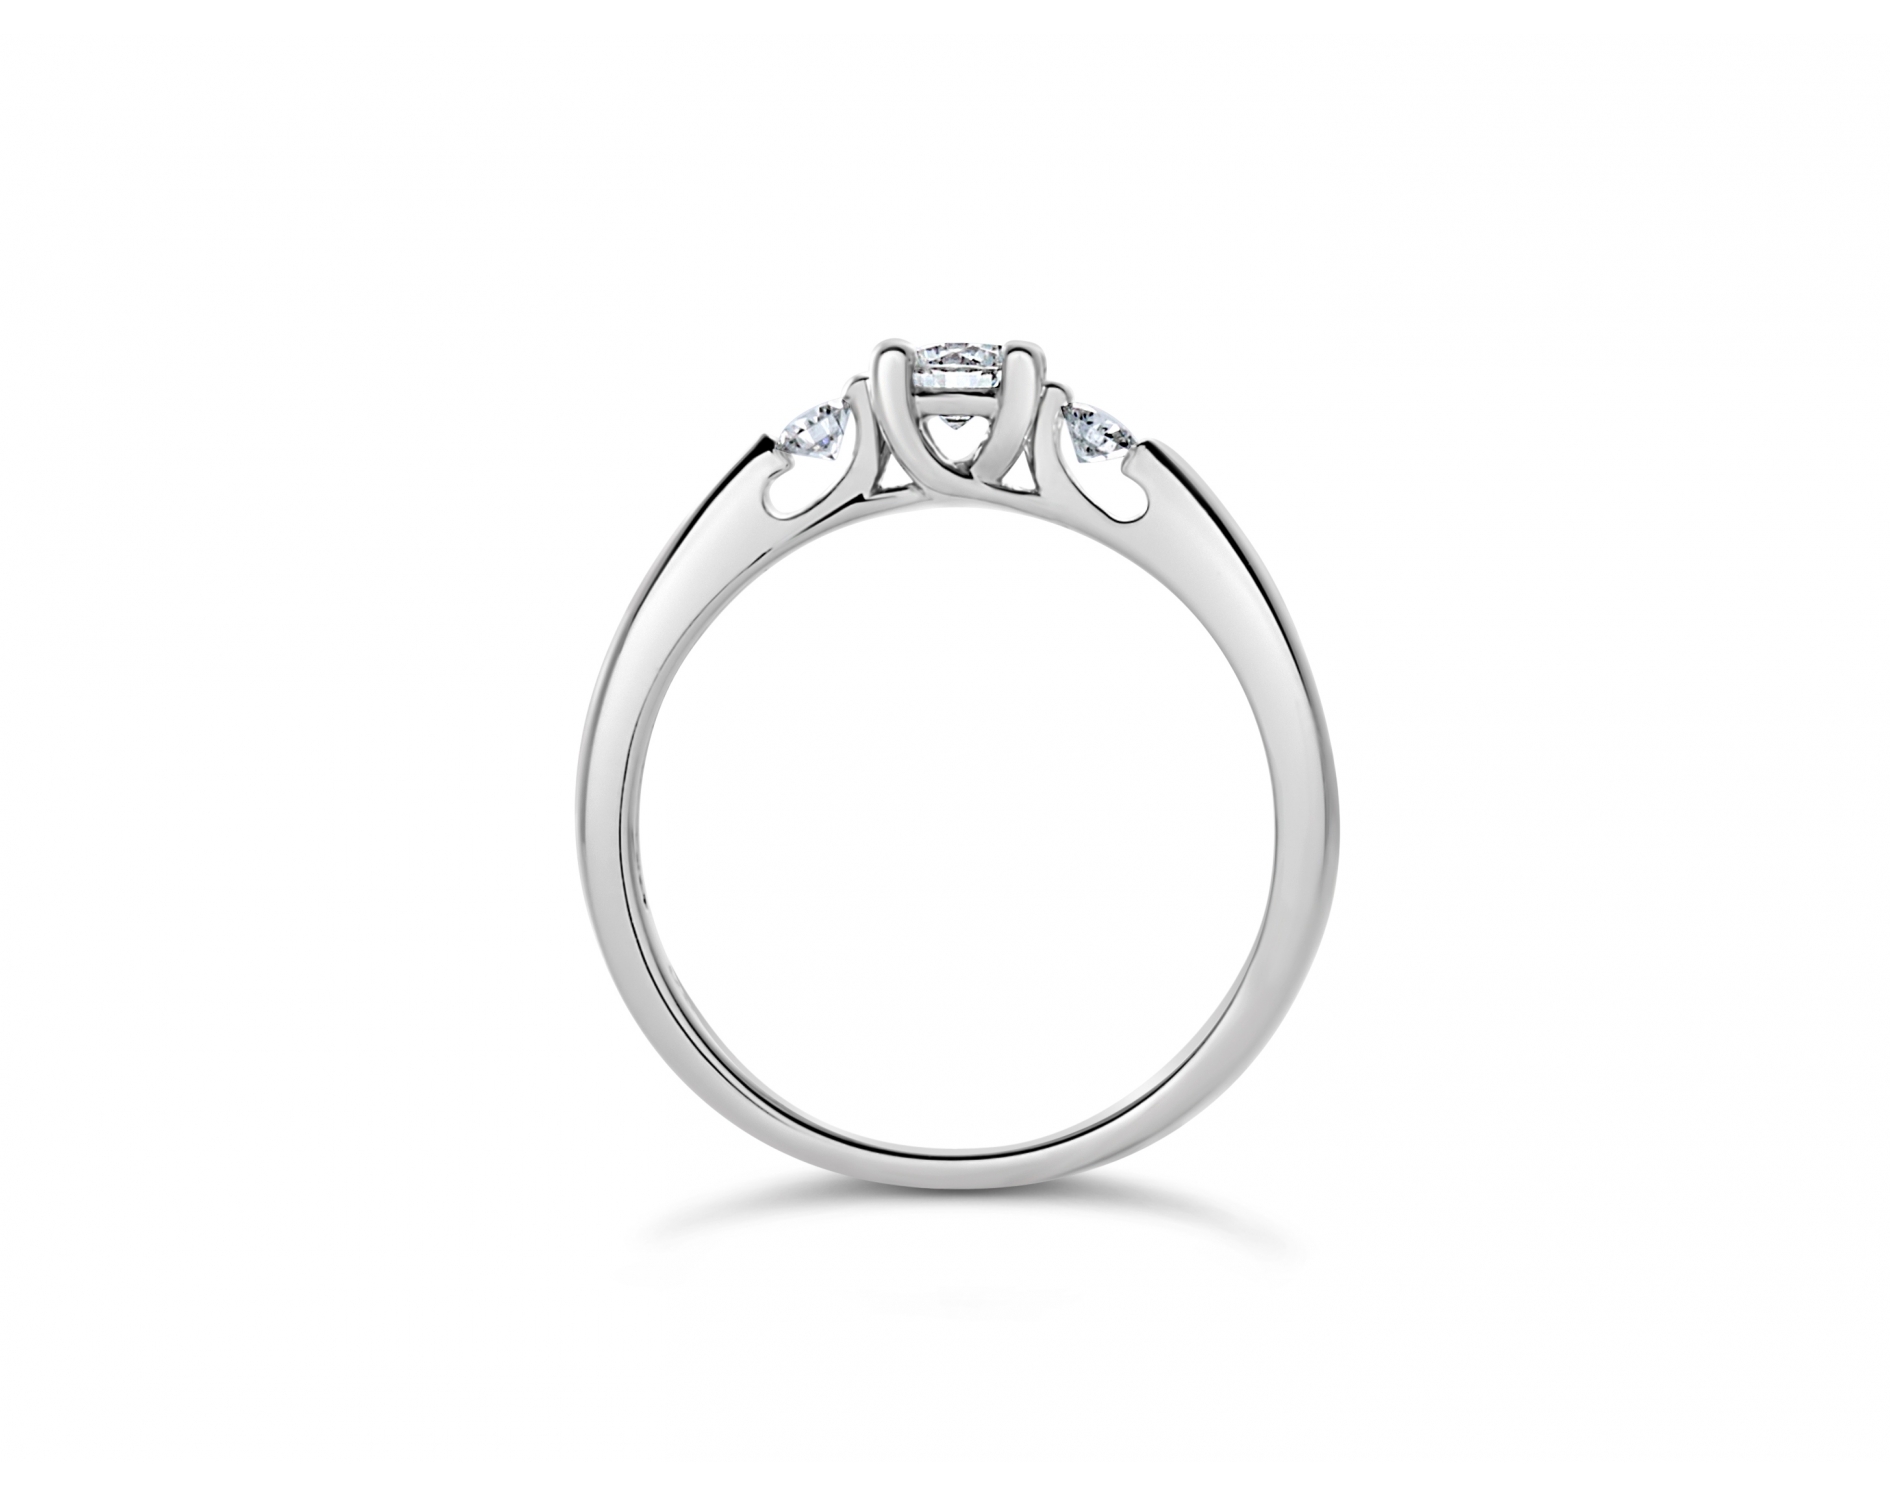 18k white gold 4 prong open gallery three stone engagement ring